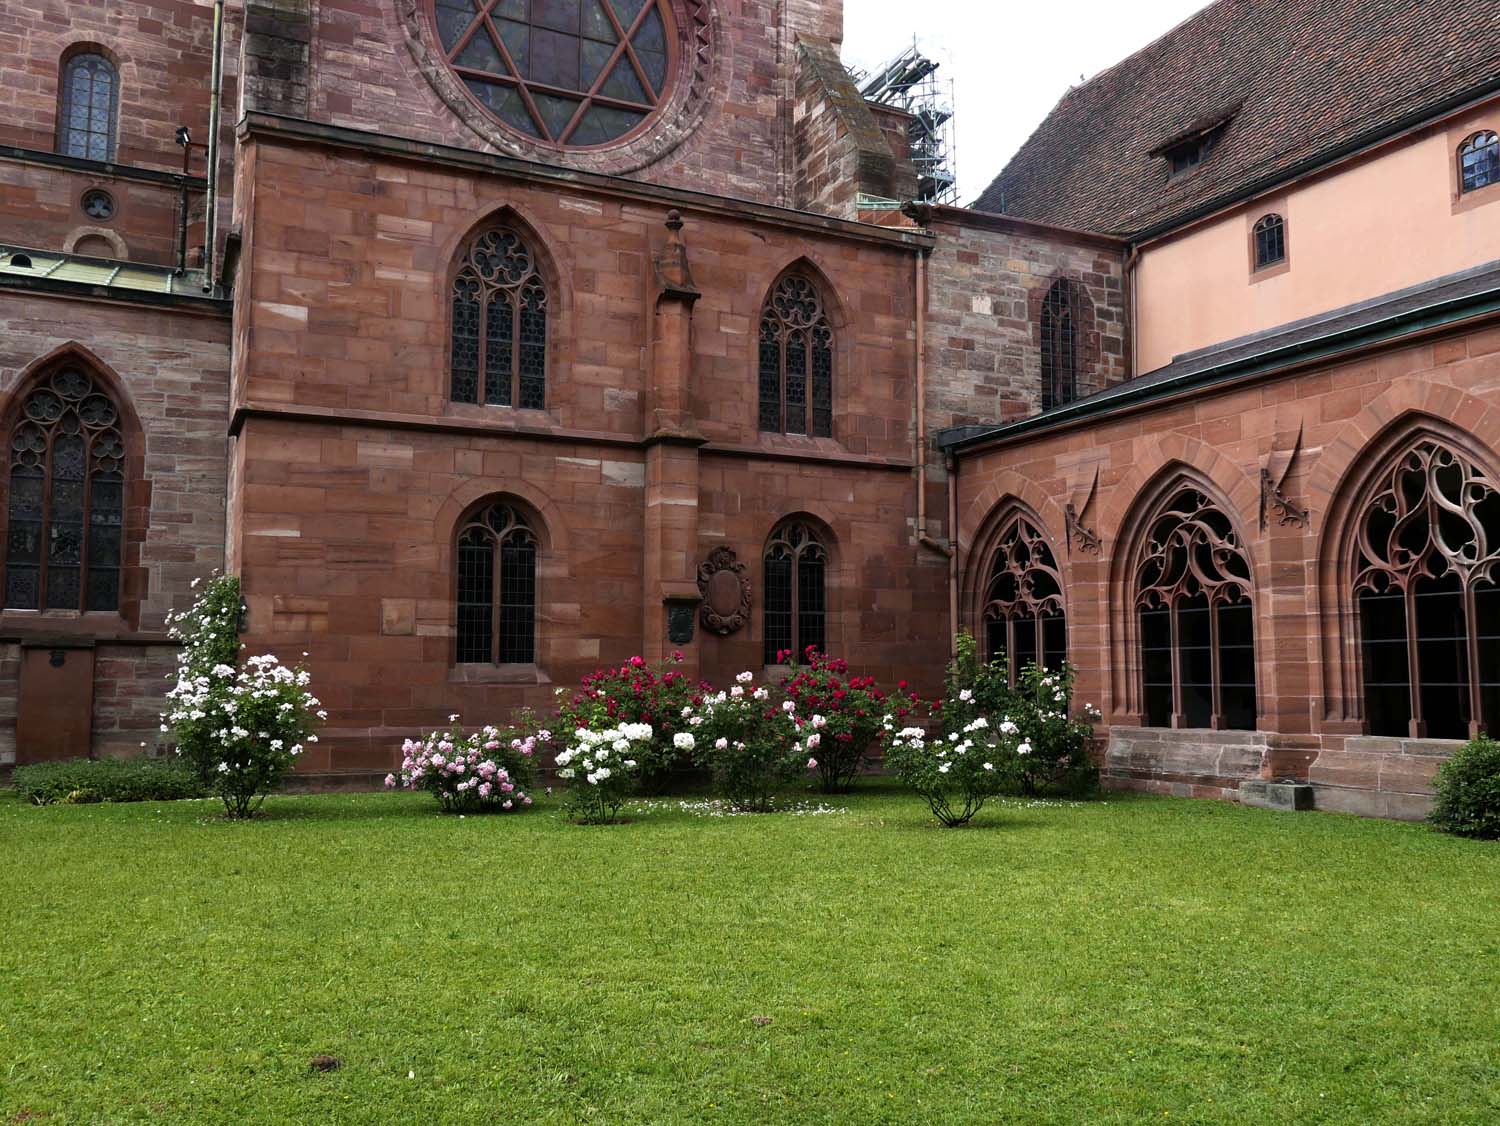 The courtyard of the Basler Münster